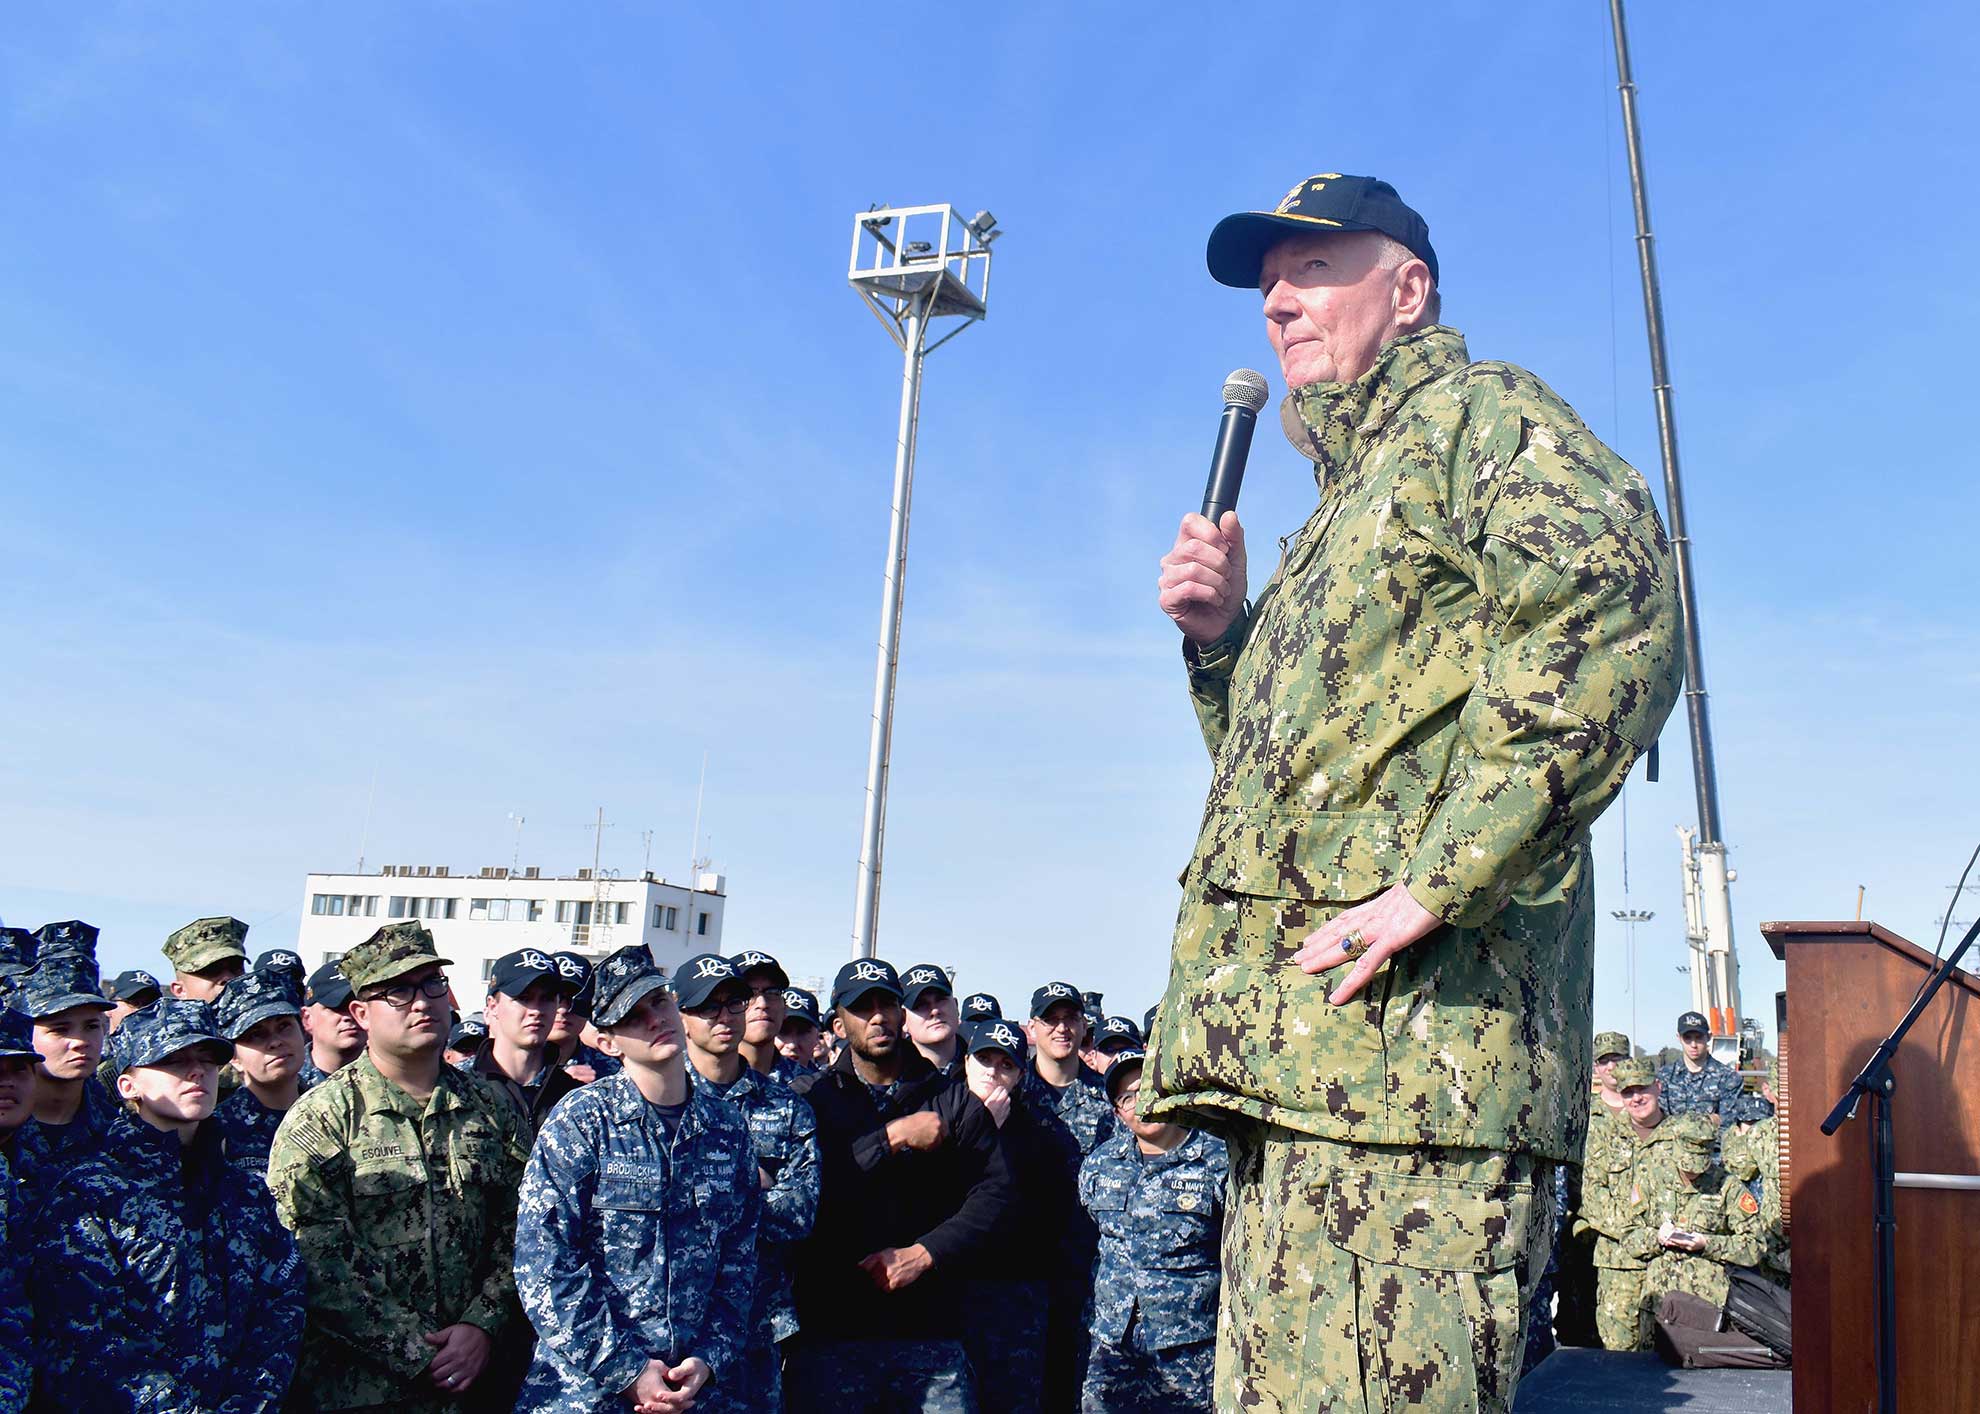 Naval Station Rota, Spain (Jan. 12, 2018) Commander, U.S. Naval Forces Europe-Africa, Adm. James Foggo III speaks to Sailors assigned to Arleigh-Burke class guided-missile destroyers USS Donald Cook (DDG 75) and USS Porter (DDG 78) at an all hands call during his visit to Naval Station Rota, Spain. Foggo met with the Sailors to discuss the recent comprehensive review along with their role, safety and mission at sea. Naval Station Rota, which is part of, Navy Region Europe, Africa, Southwest Asia (EURAFSWA), provides operational platforms ashore that enable U.S., allied and partner nation forces to be where they are needed and when they are needed to ensure security and stability in Europe, Africa and Southwest Asia -- U.S. Photo by MCS3 M. Jang. -